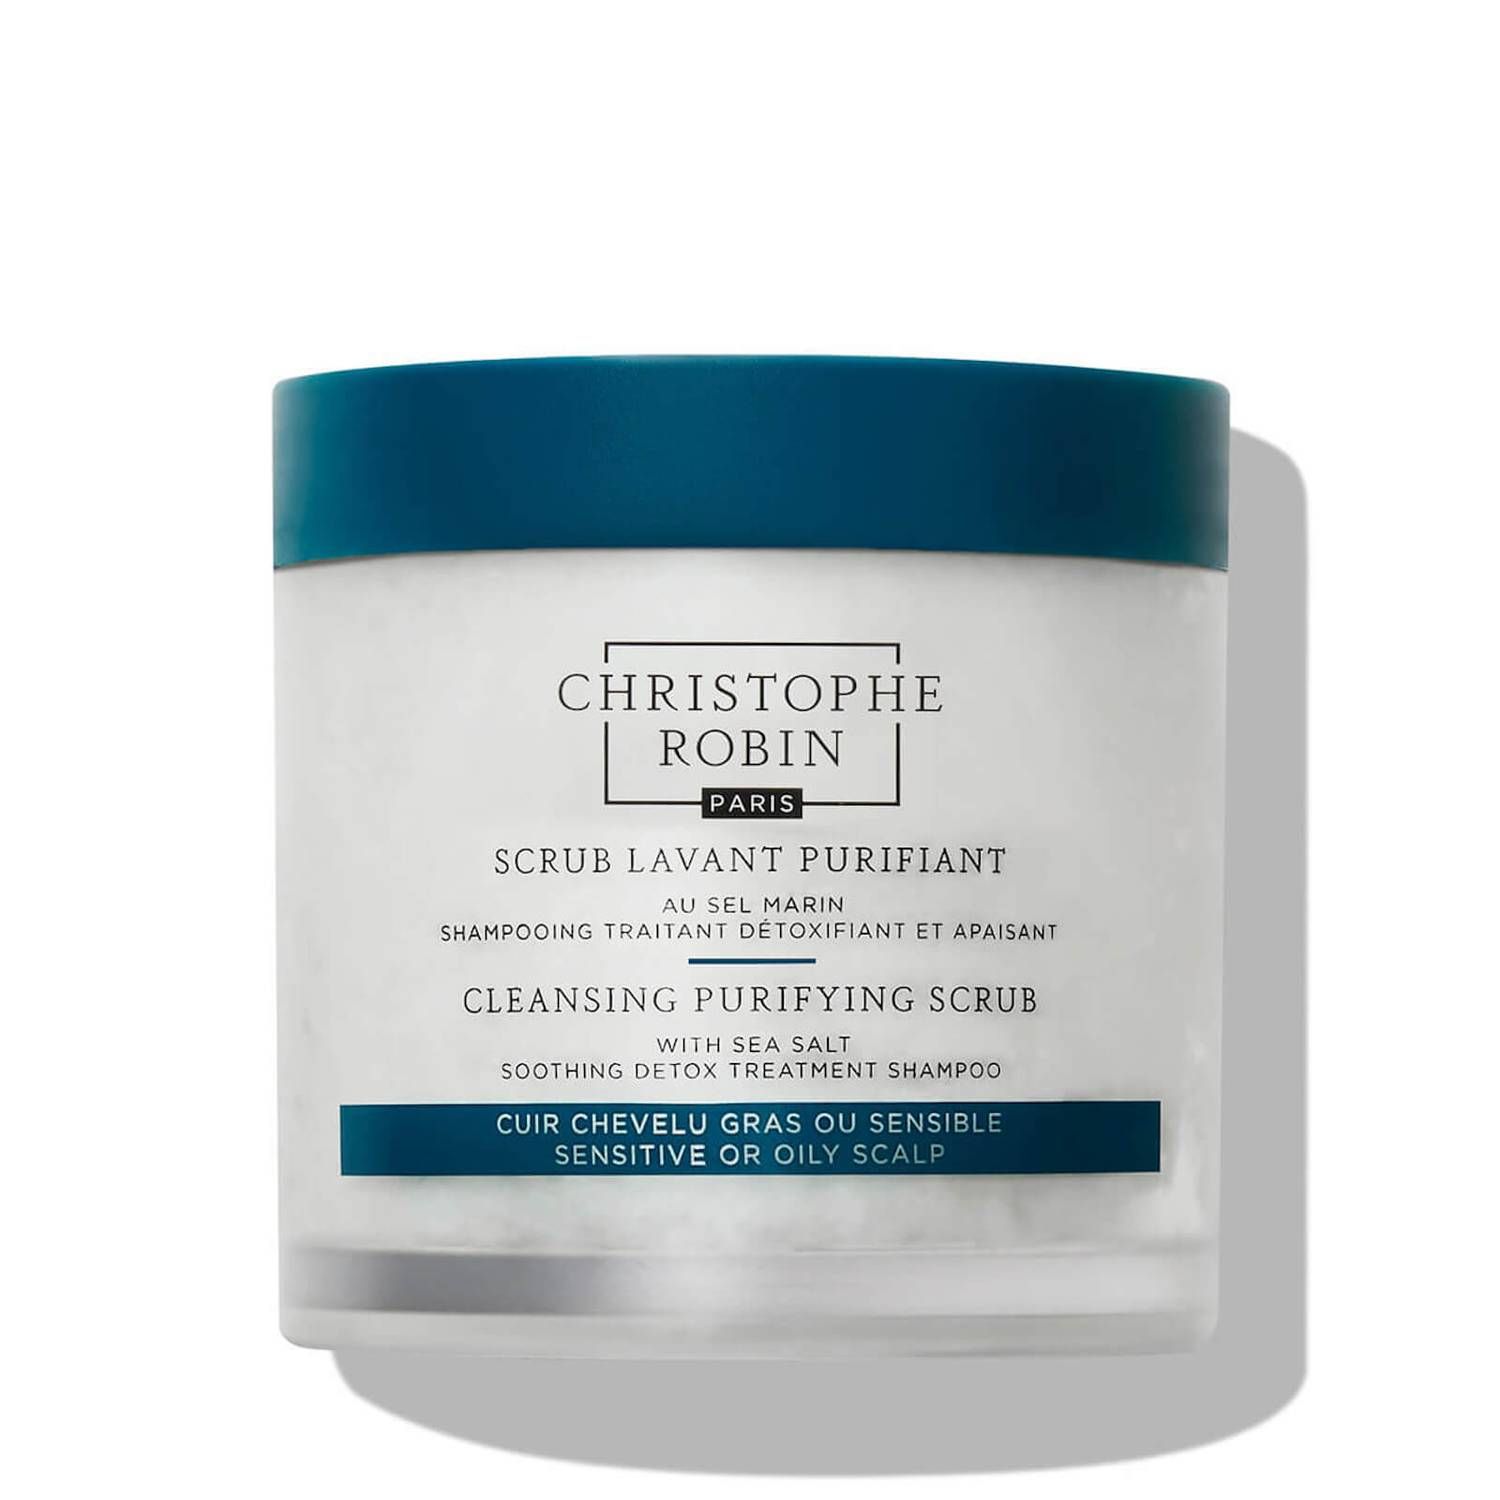 Cleansing Purifying Scrub with Sea Salt | Christophe Robin UK